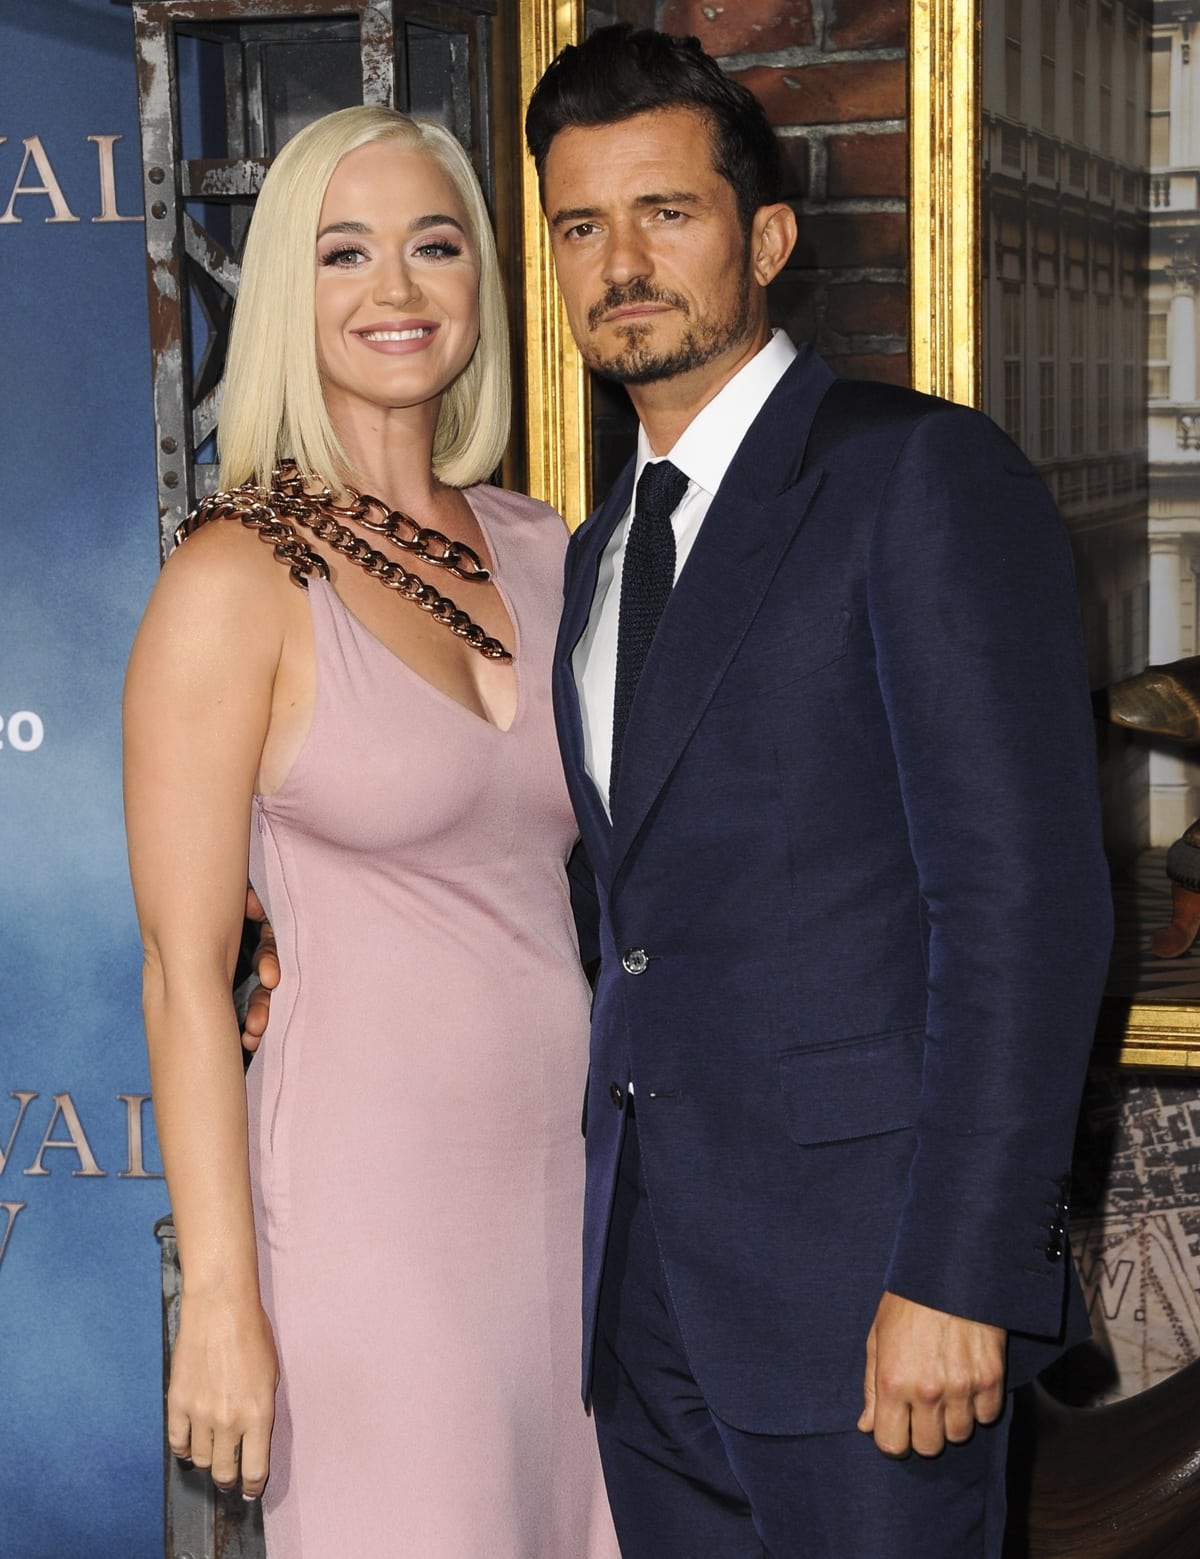 Katy Perry have Orlando Bloom have both been married once before